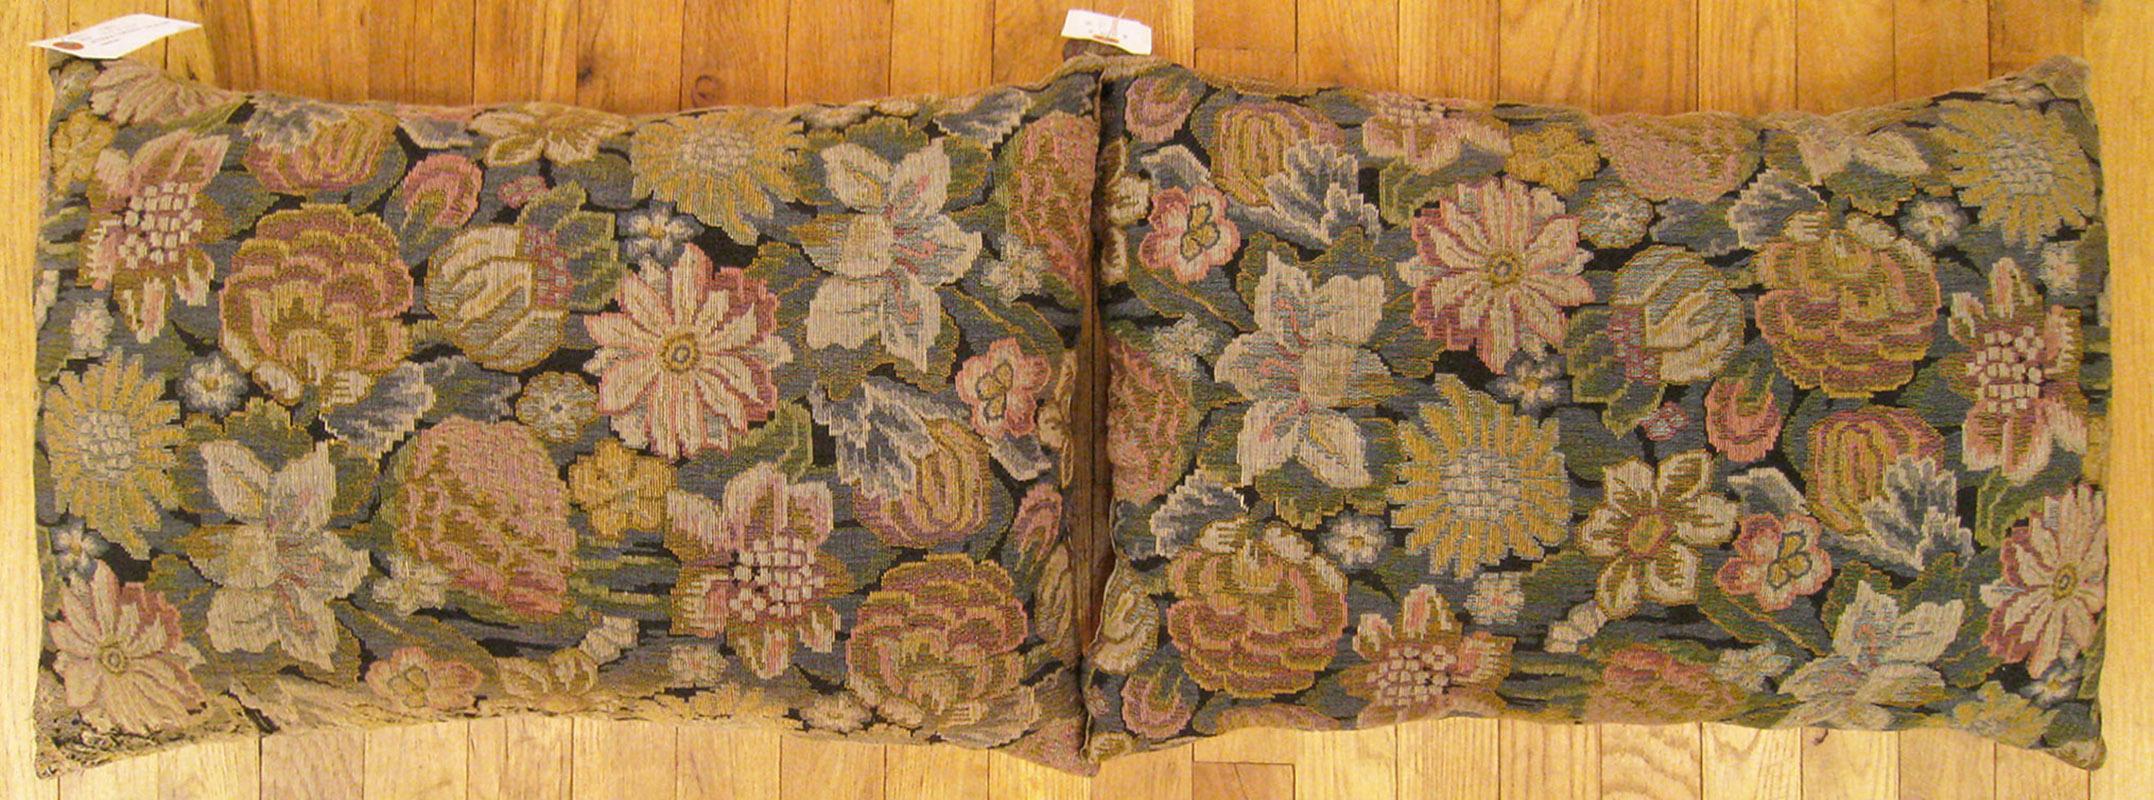 A pair of antique Jacquard Tapestry pillows ; size 1'3” x 1'11” Each.

An antique decorative pillows with floral elements allover a gold green central field, size 1'3